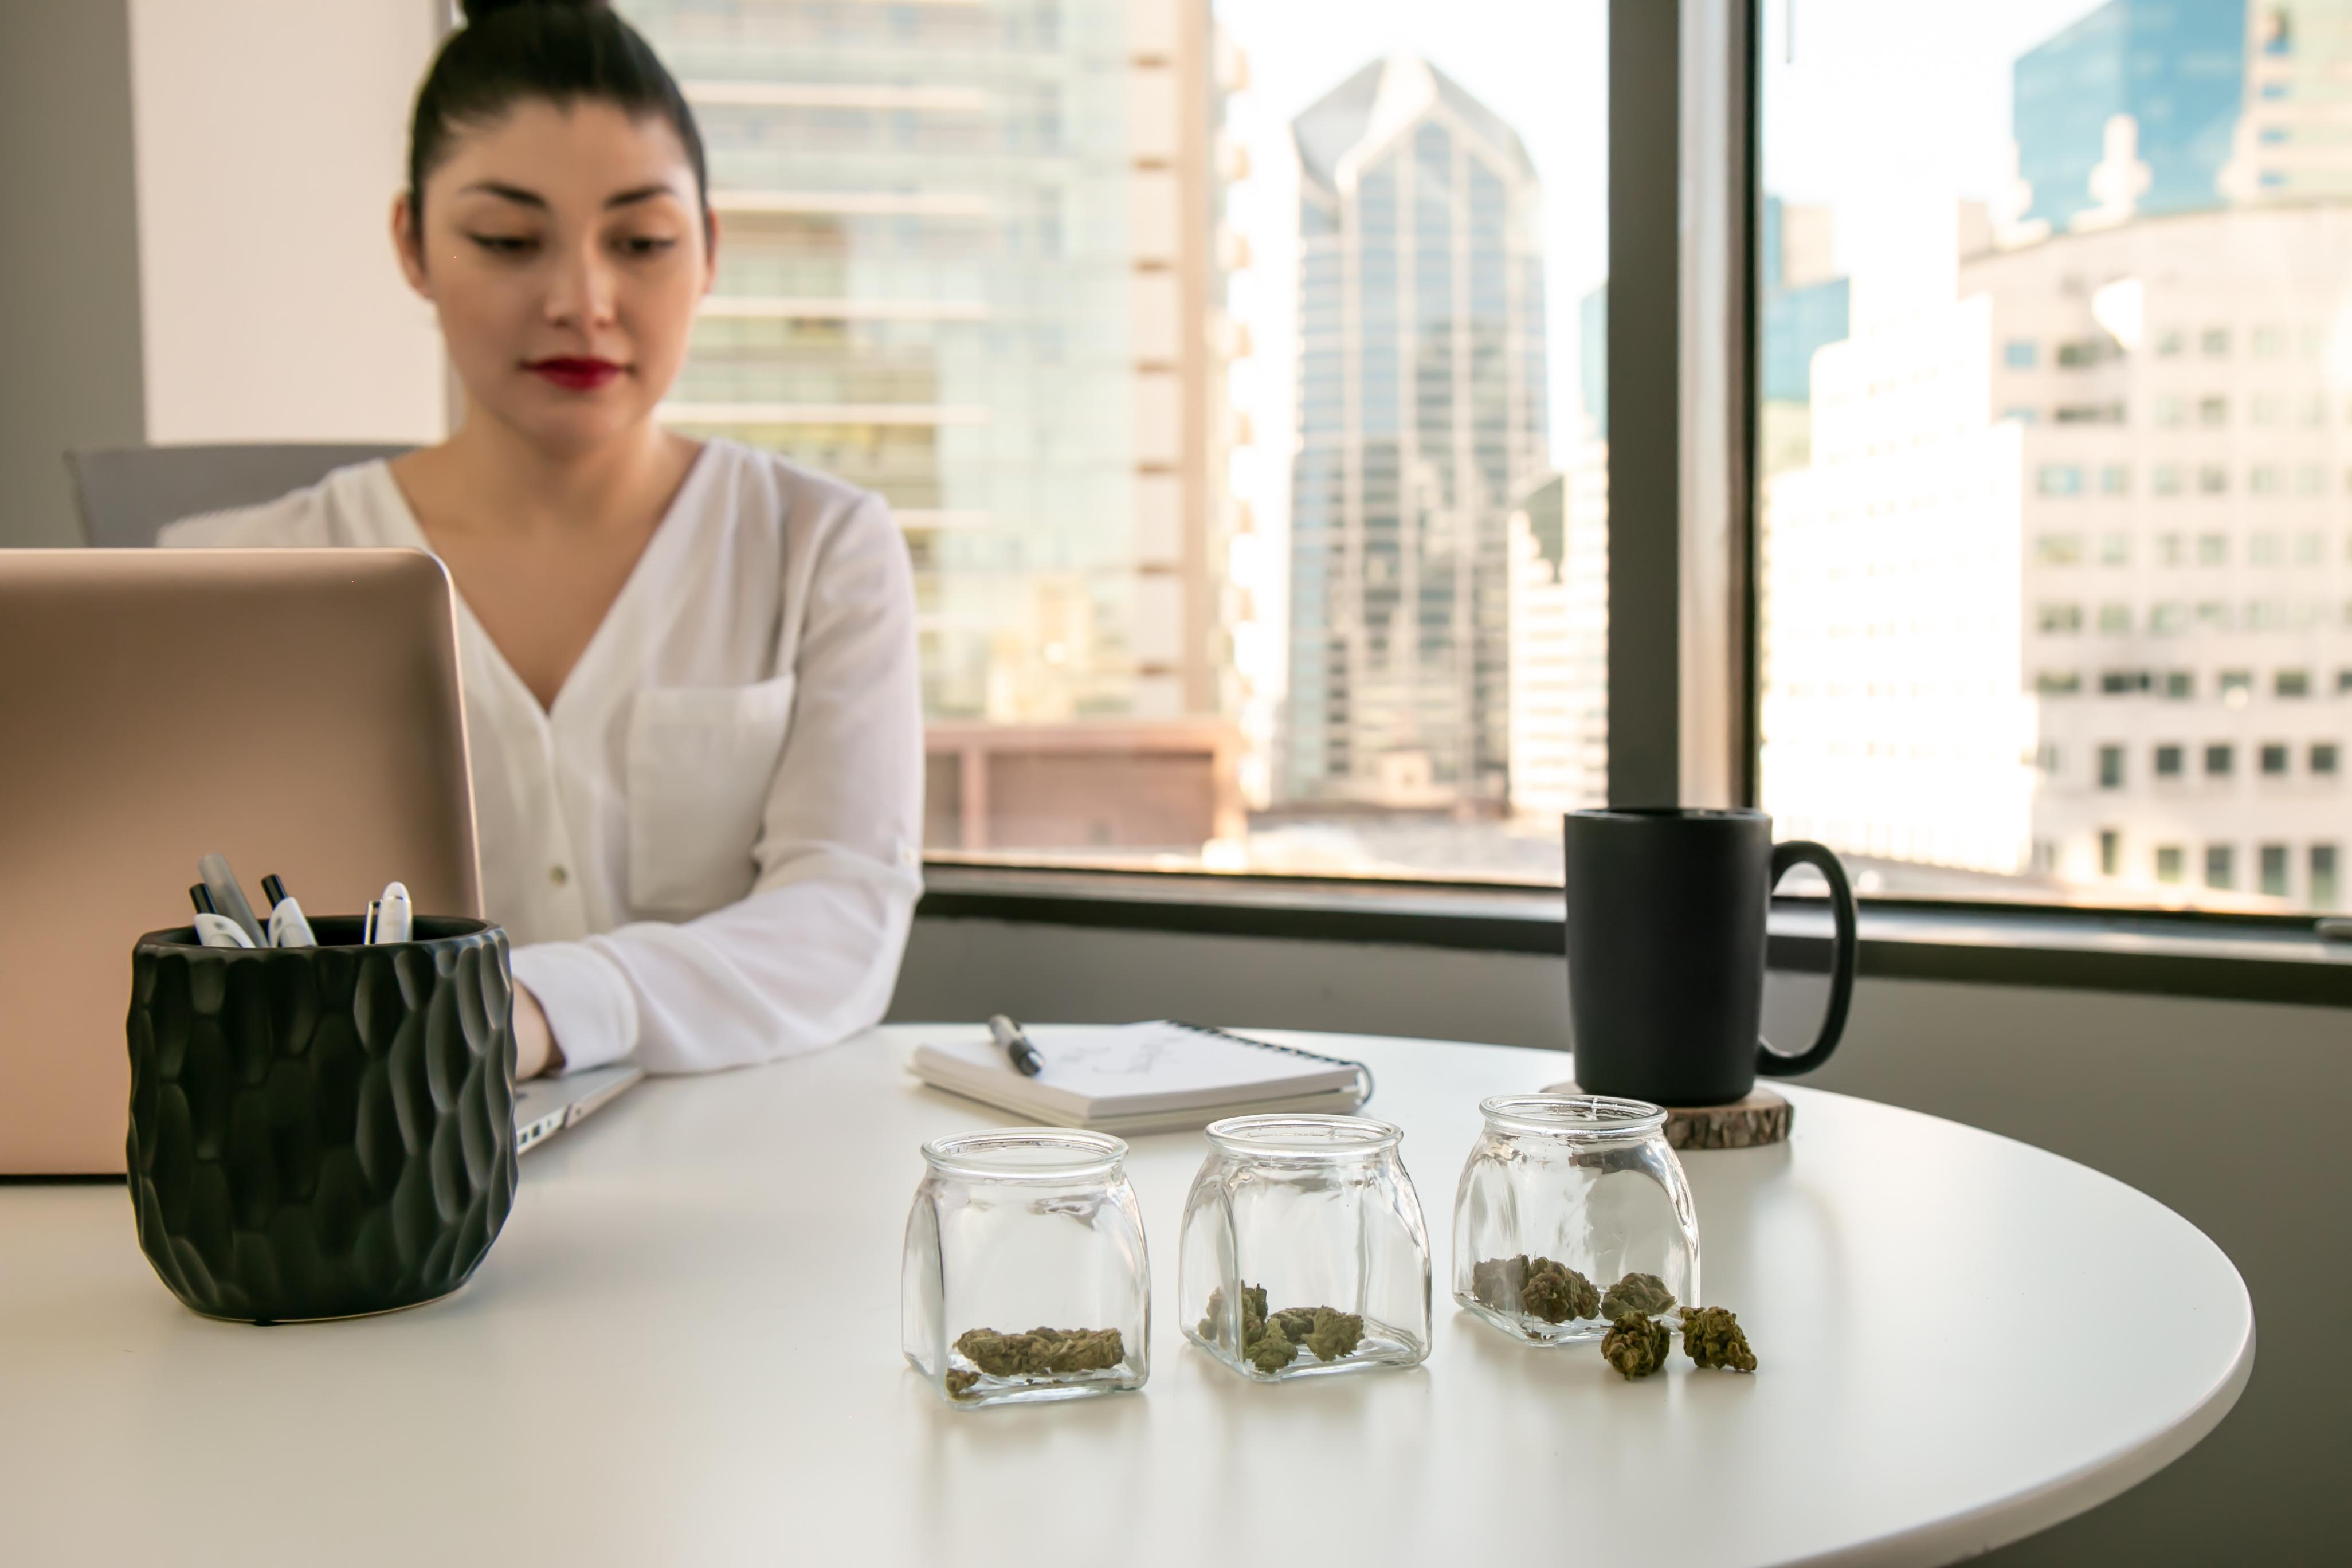 A woman on a laptop looks at three open glass containers of cannabis products placed on her desk